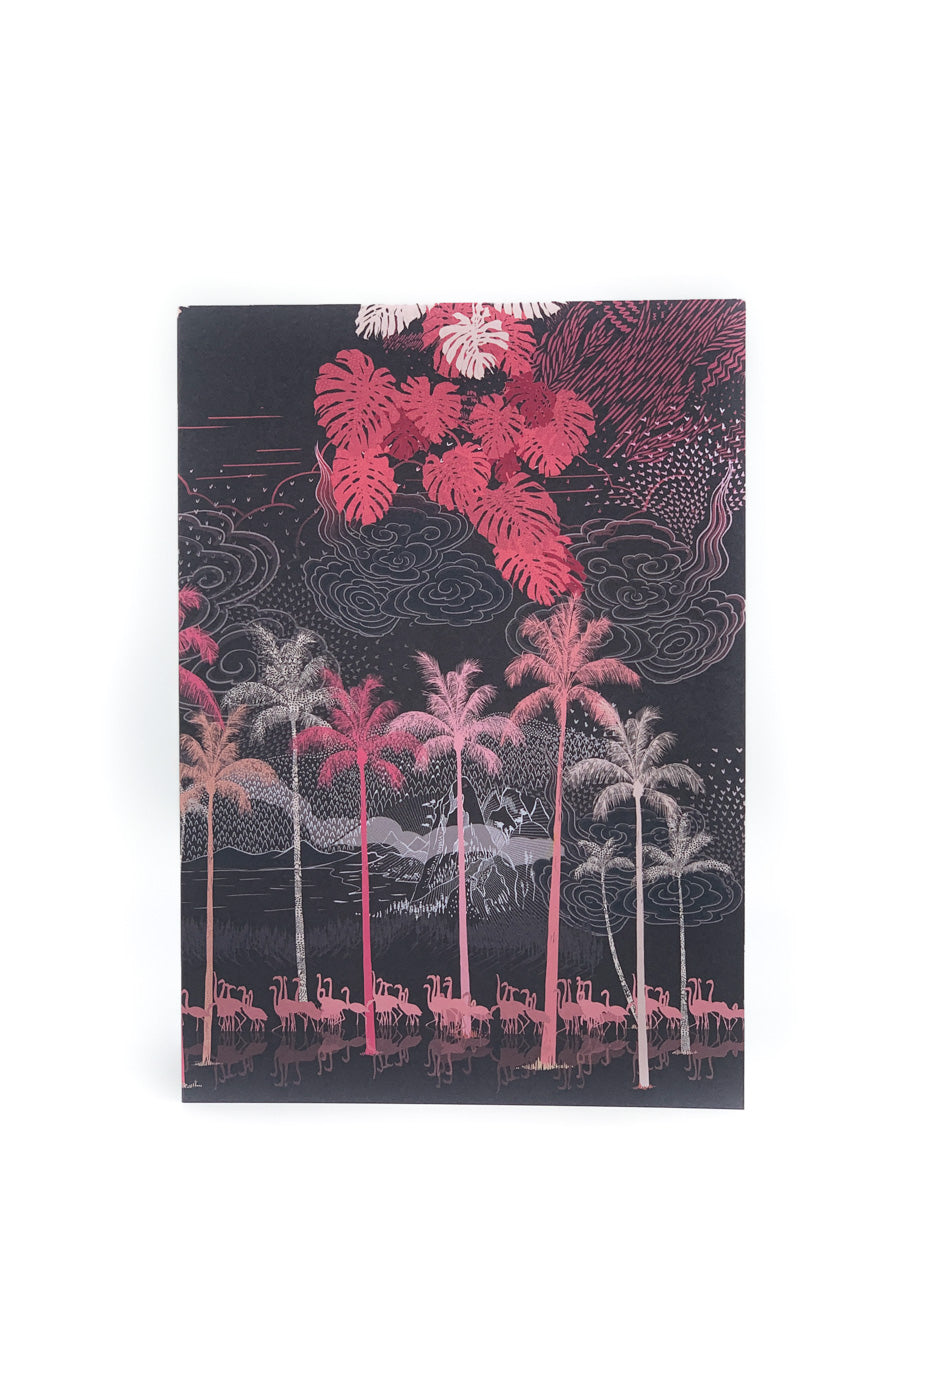 A printed greeting card in pink and black